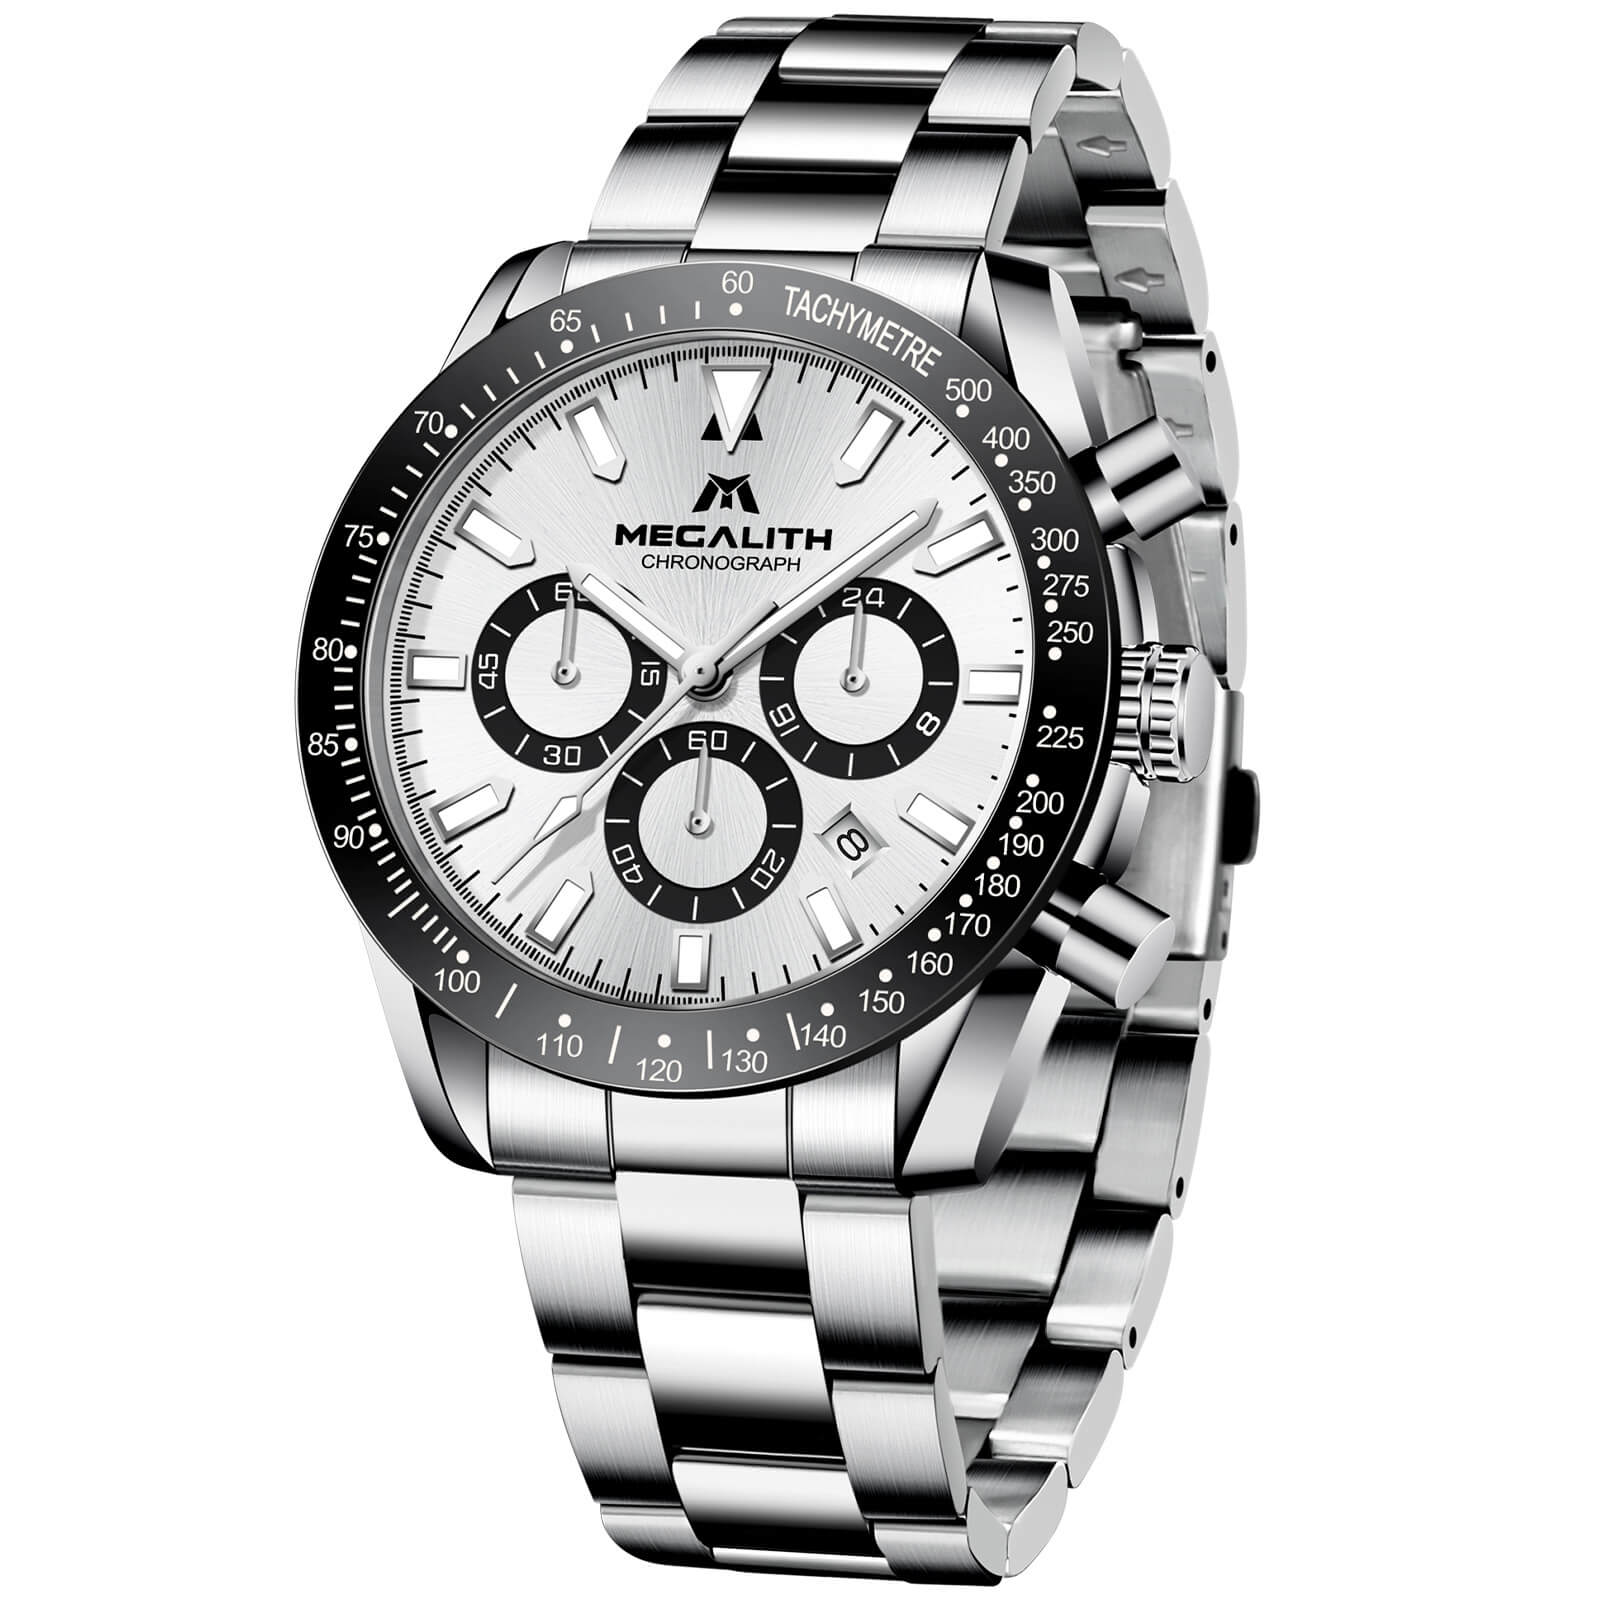 Chronograph Watch, Stainless Steel Band, 8264M